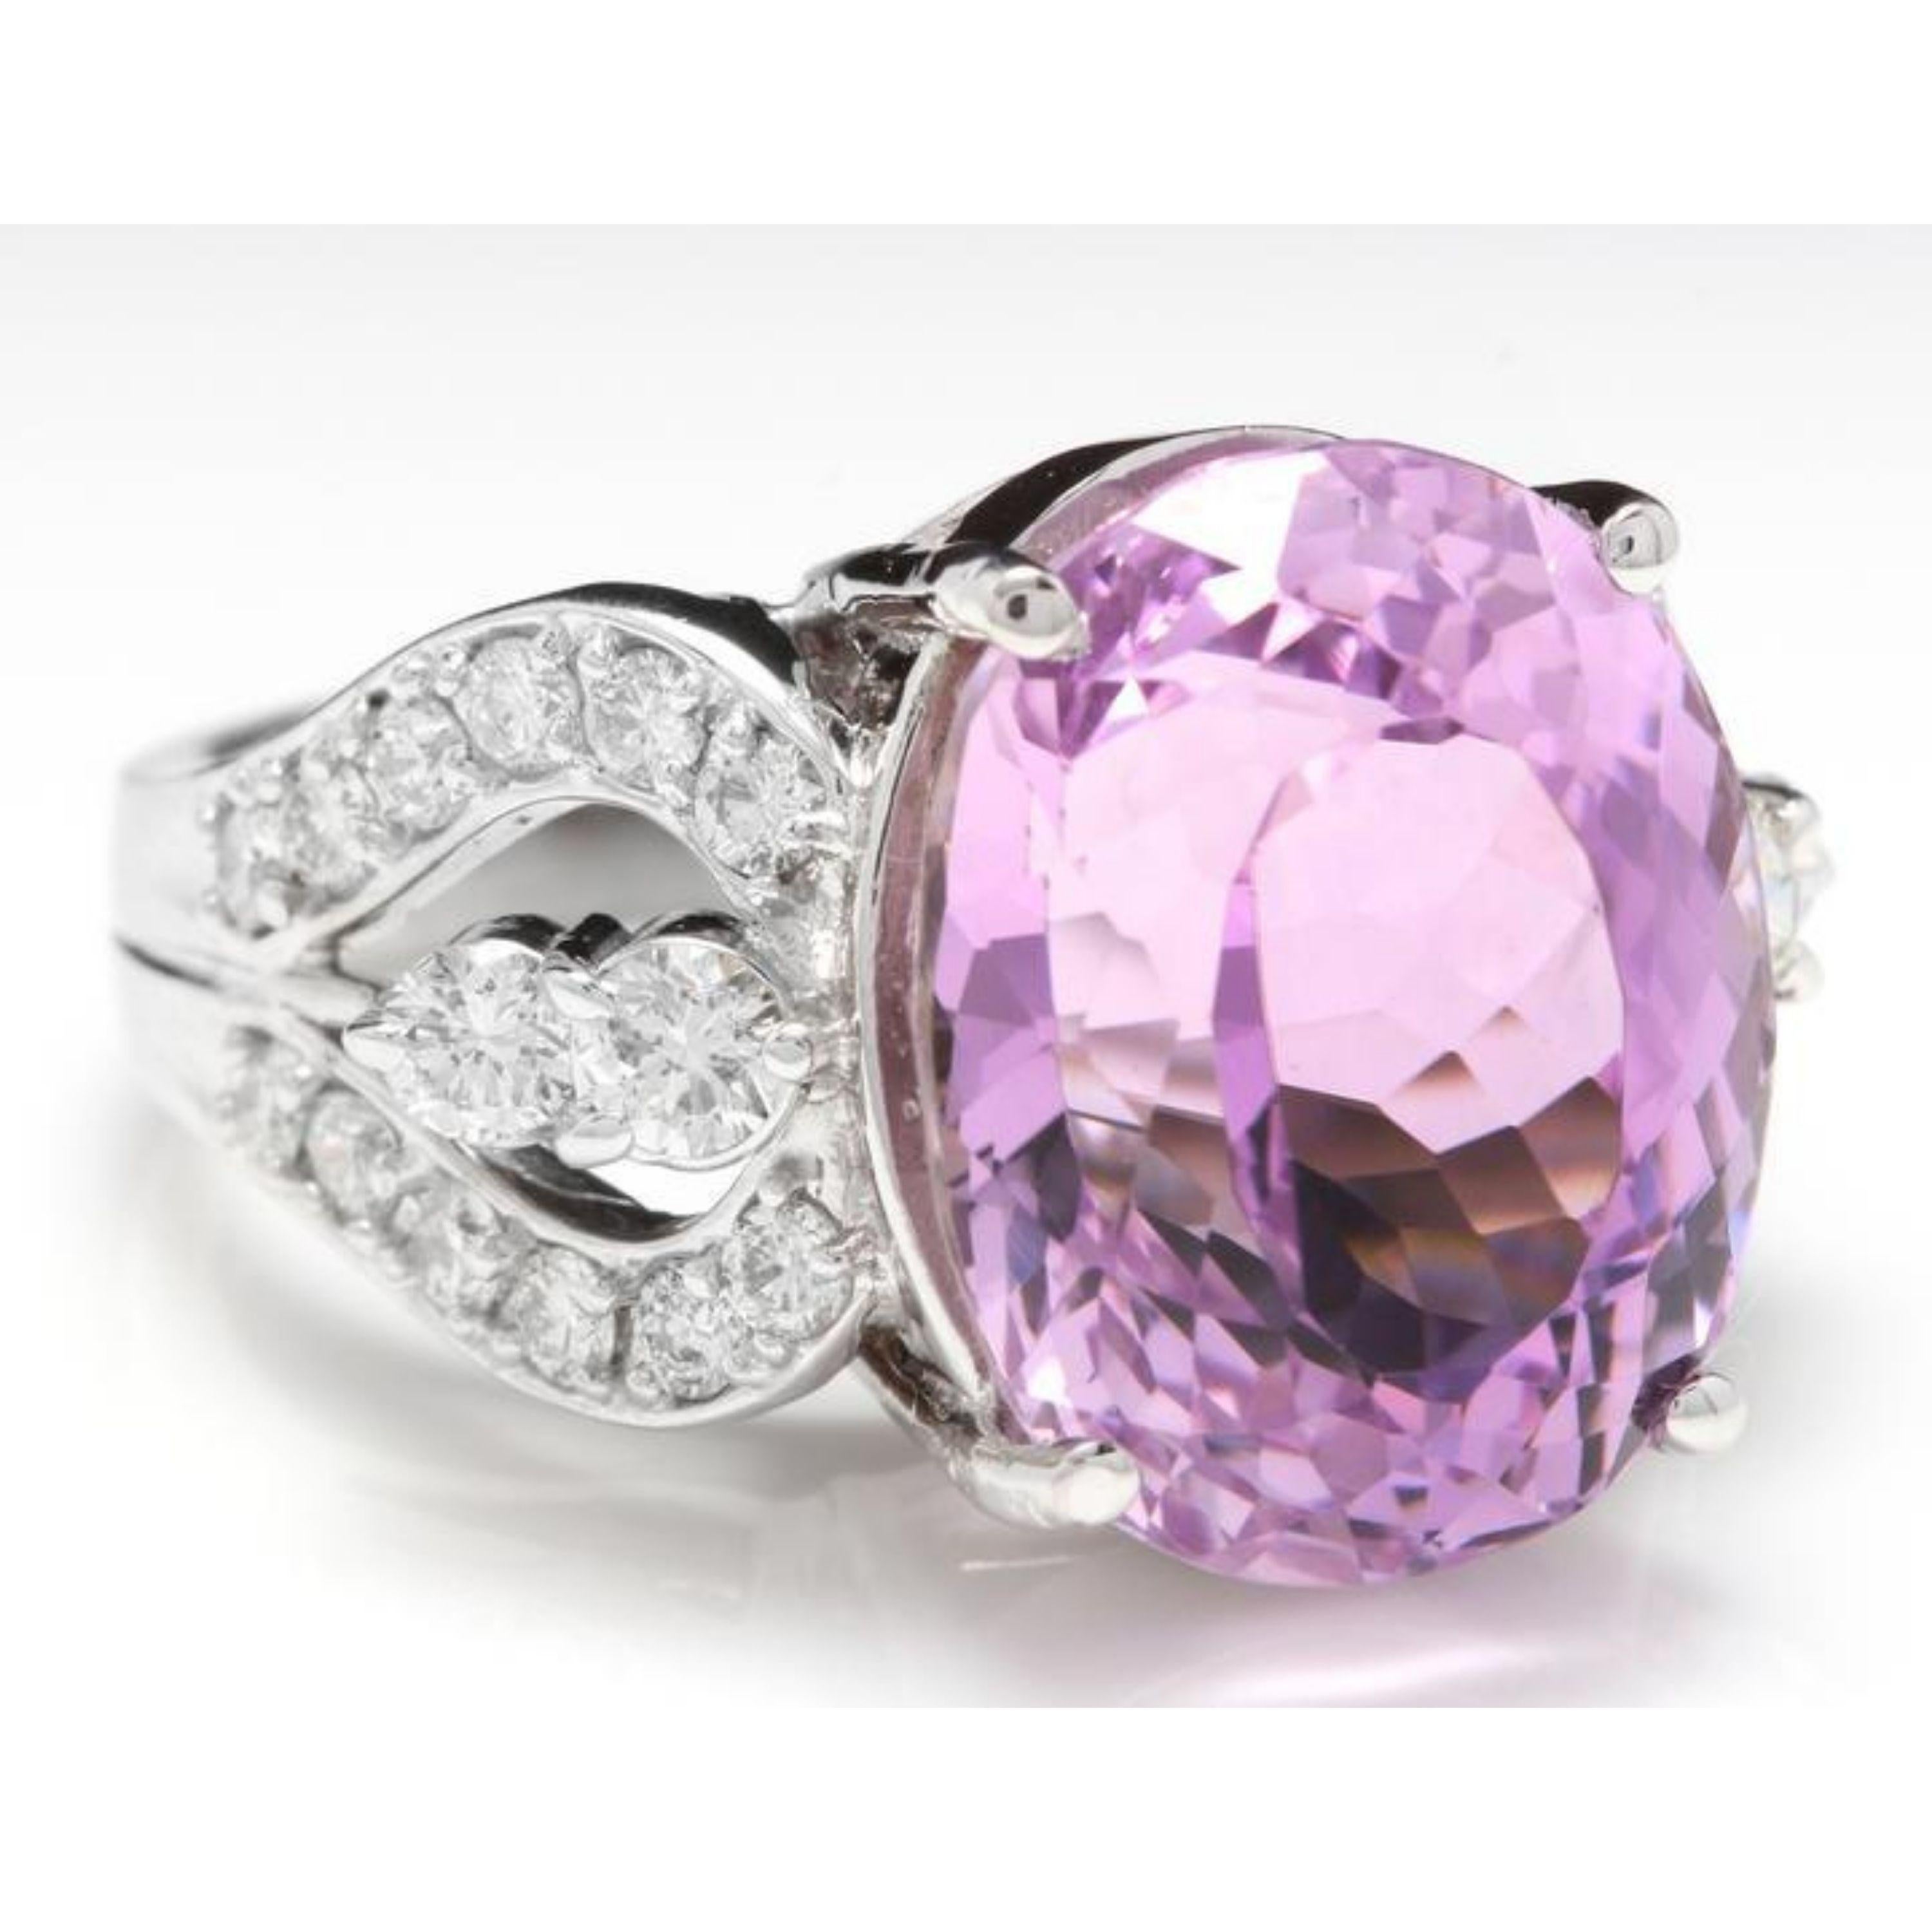 16.05 Carats Natural Kunzite and Diamond 14K Solid White Gold Ring

Total Natural Oval Cut Kunzite Weights: Approx. 15.00 Carats

Kunzite Measures: Approx. 16.00 x 12.00mm

Kunzite Treatment: Heating

Natural Round Diamonds Weight: Approx. 1.05